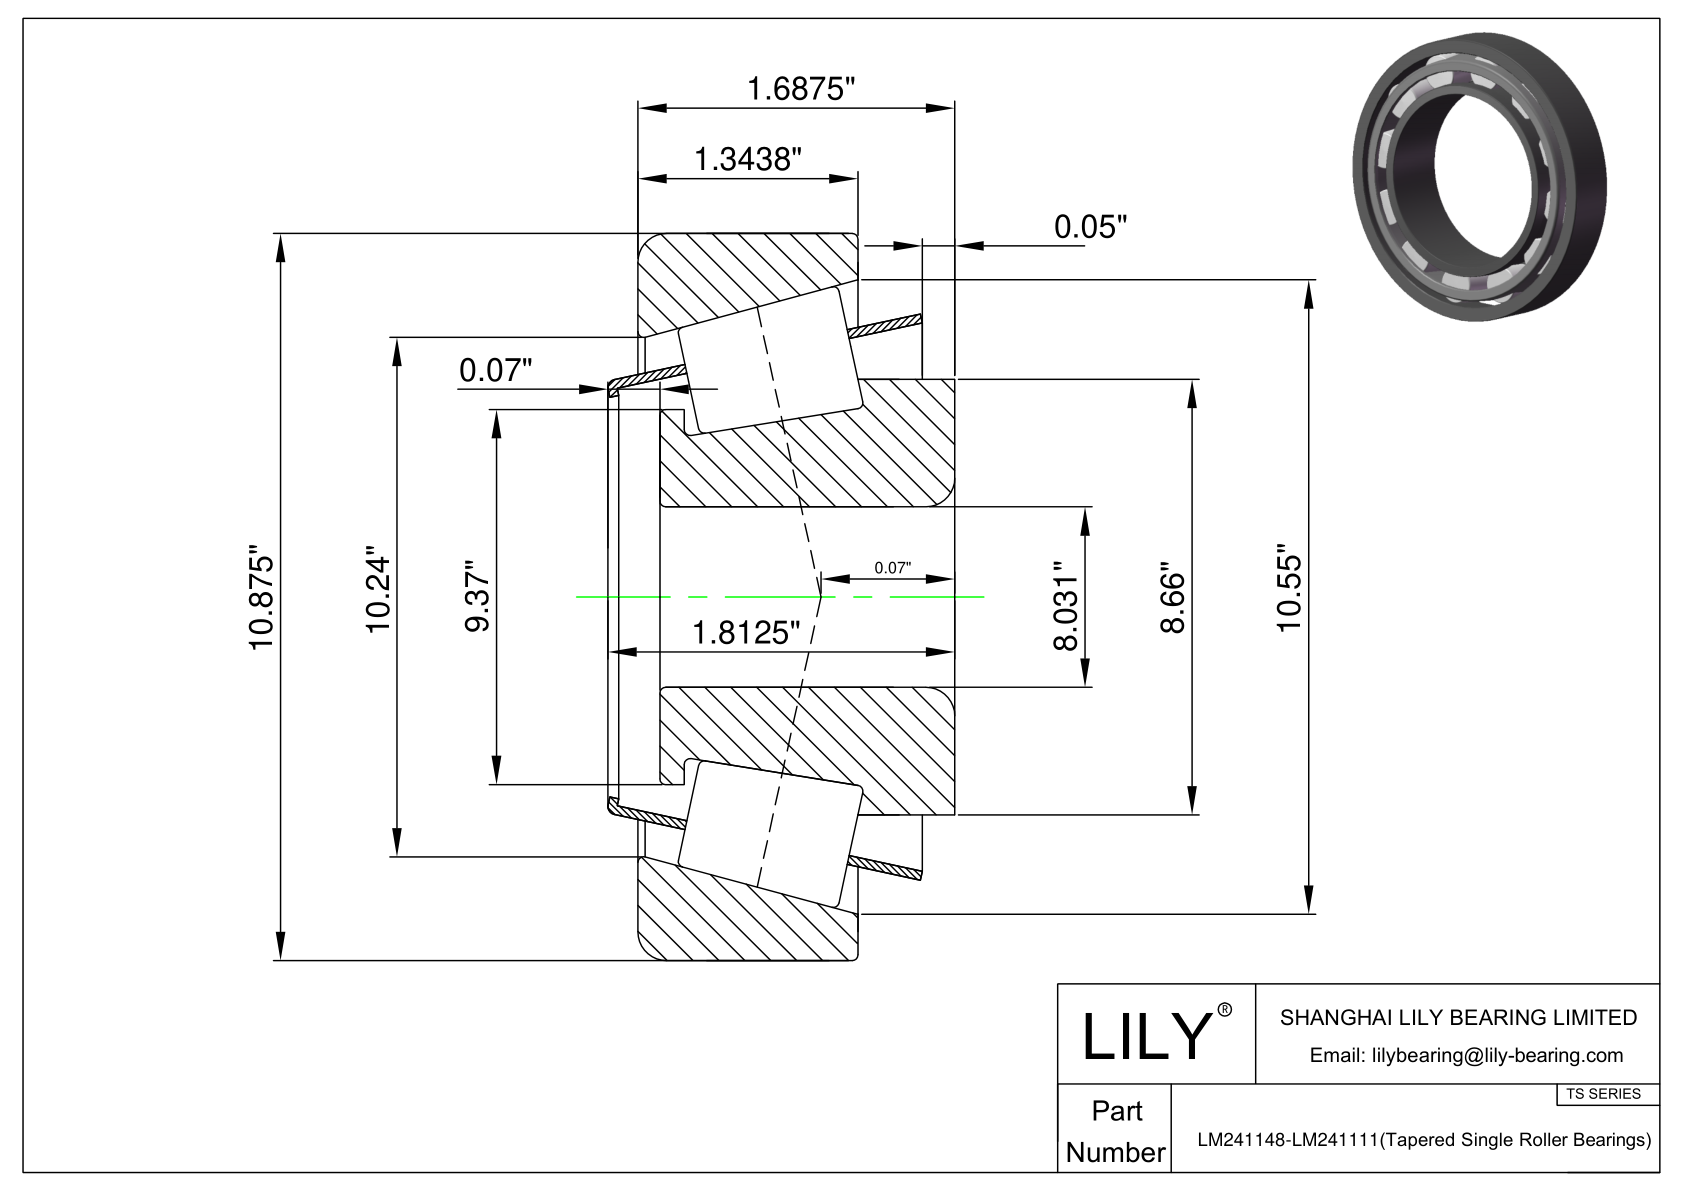 LM241148-LM241111 TS (Tapered Single Roller Bearings) (Imperial) cad drawing